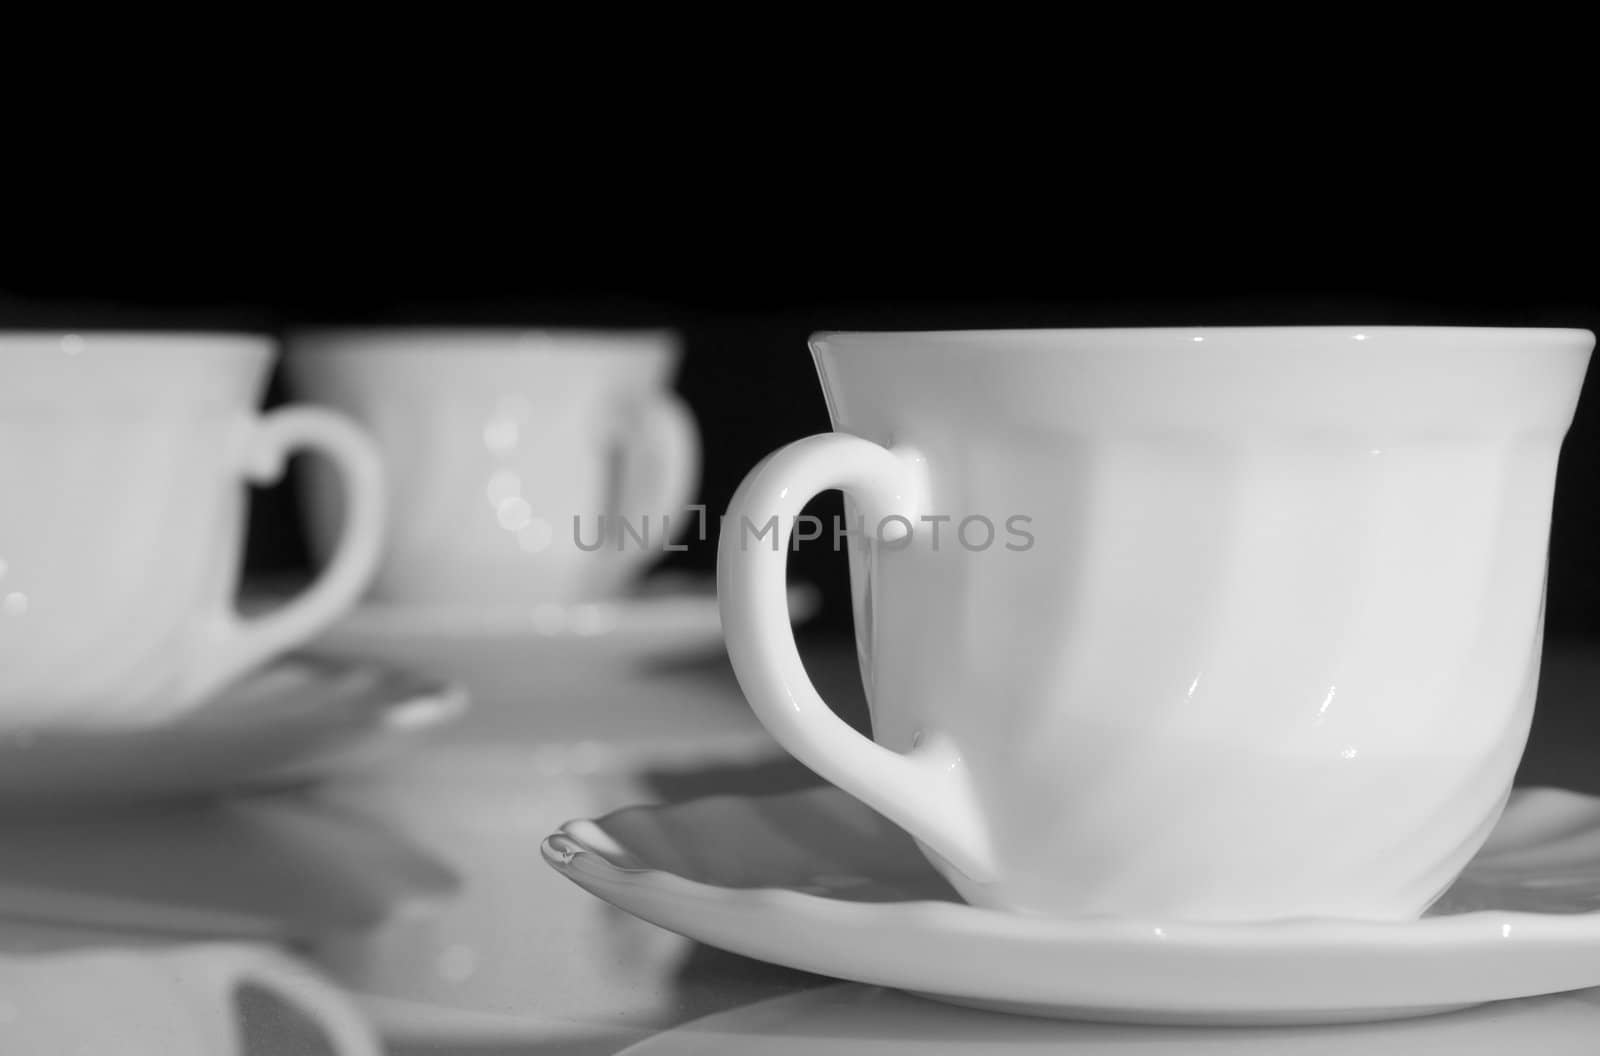 Some white tea cups on a black background